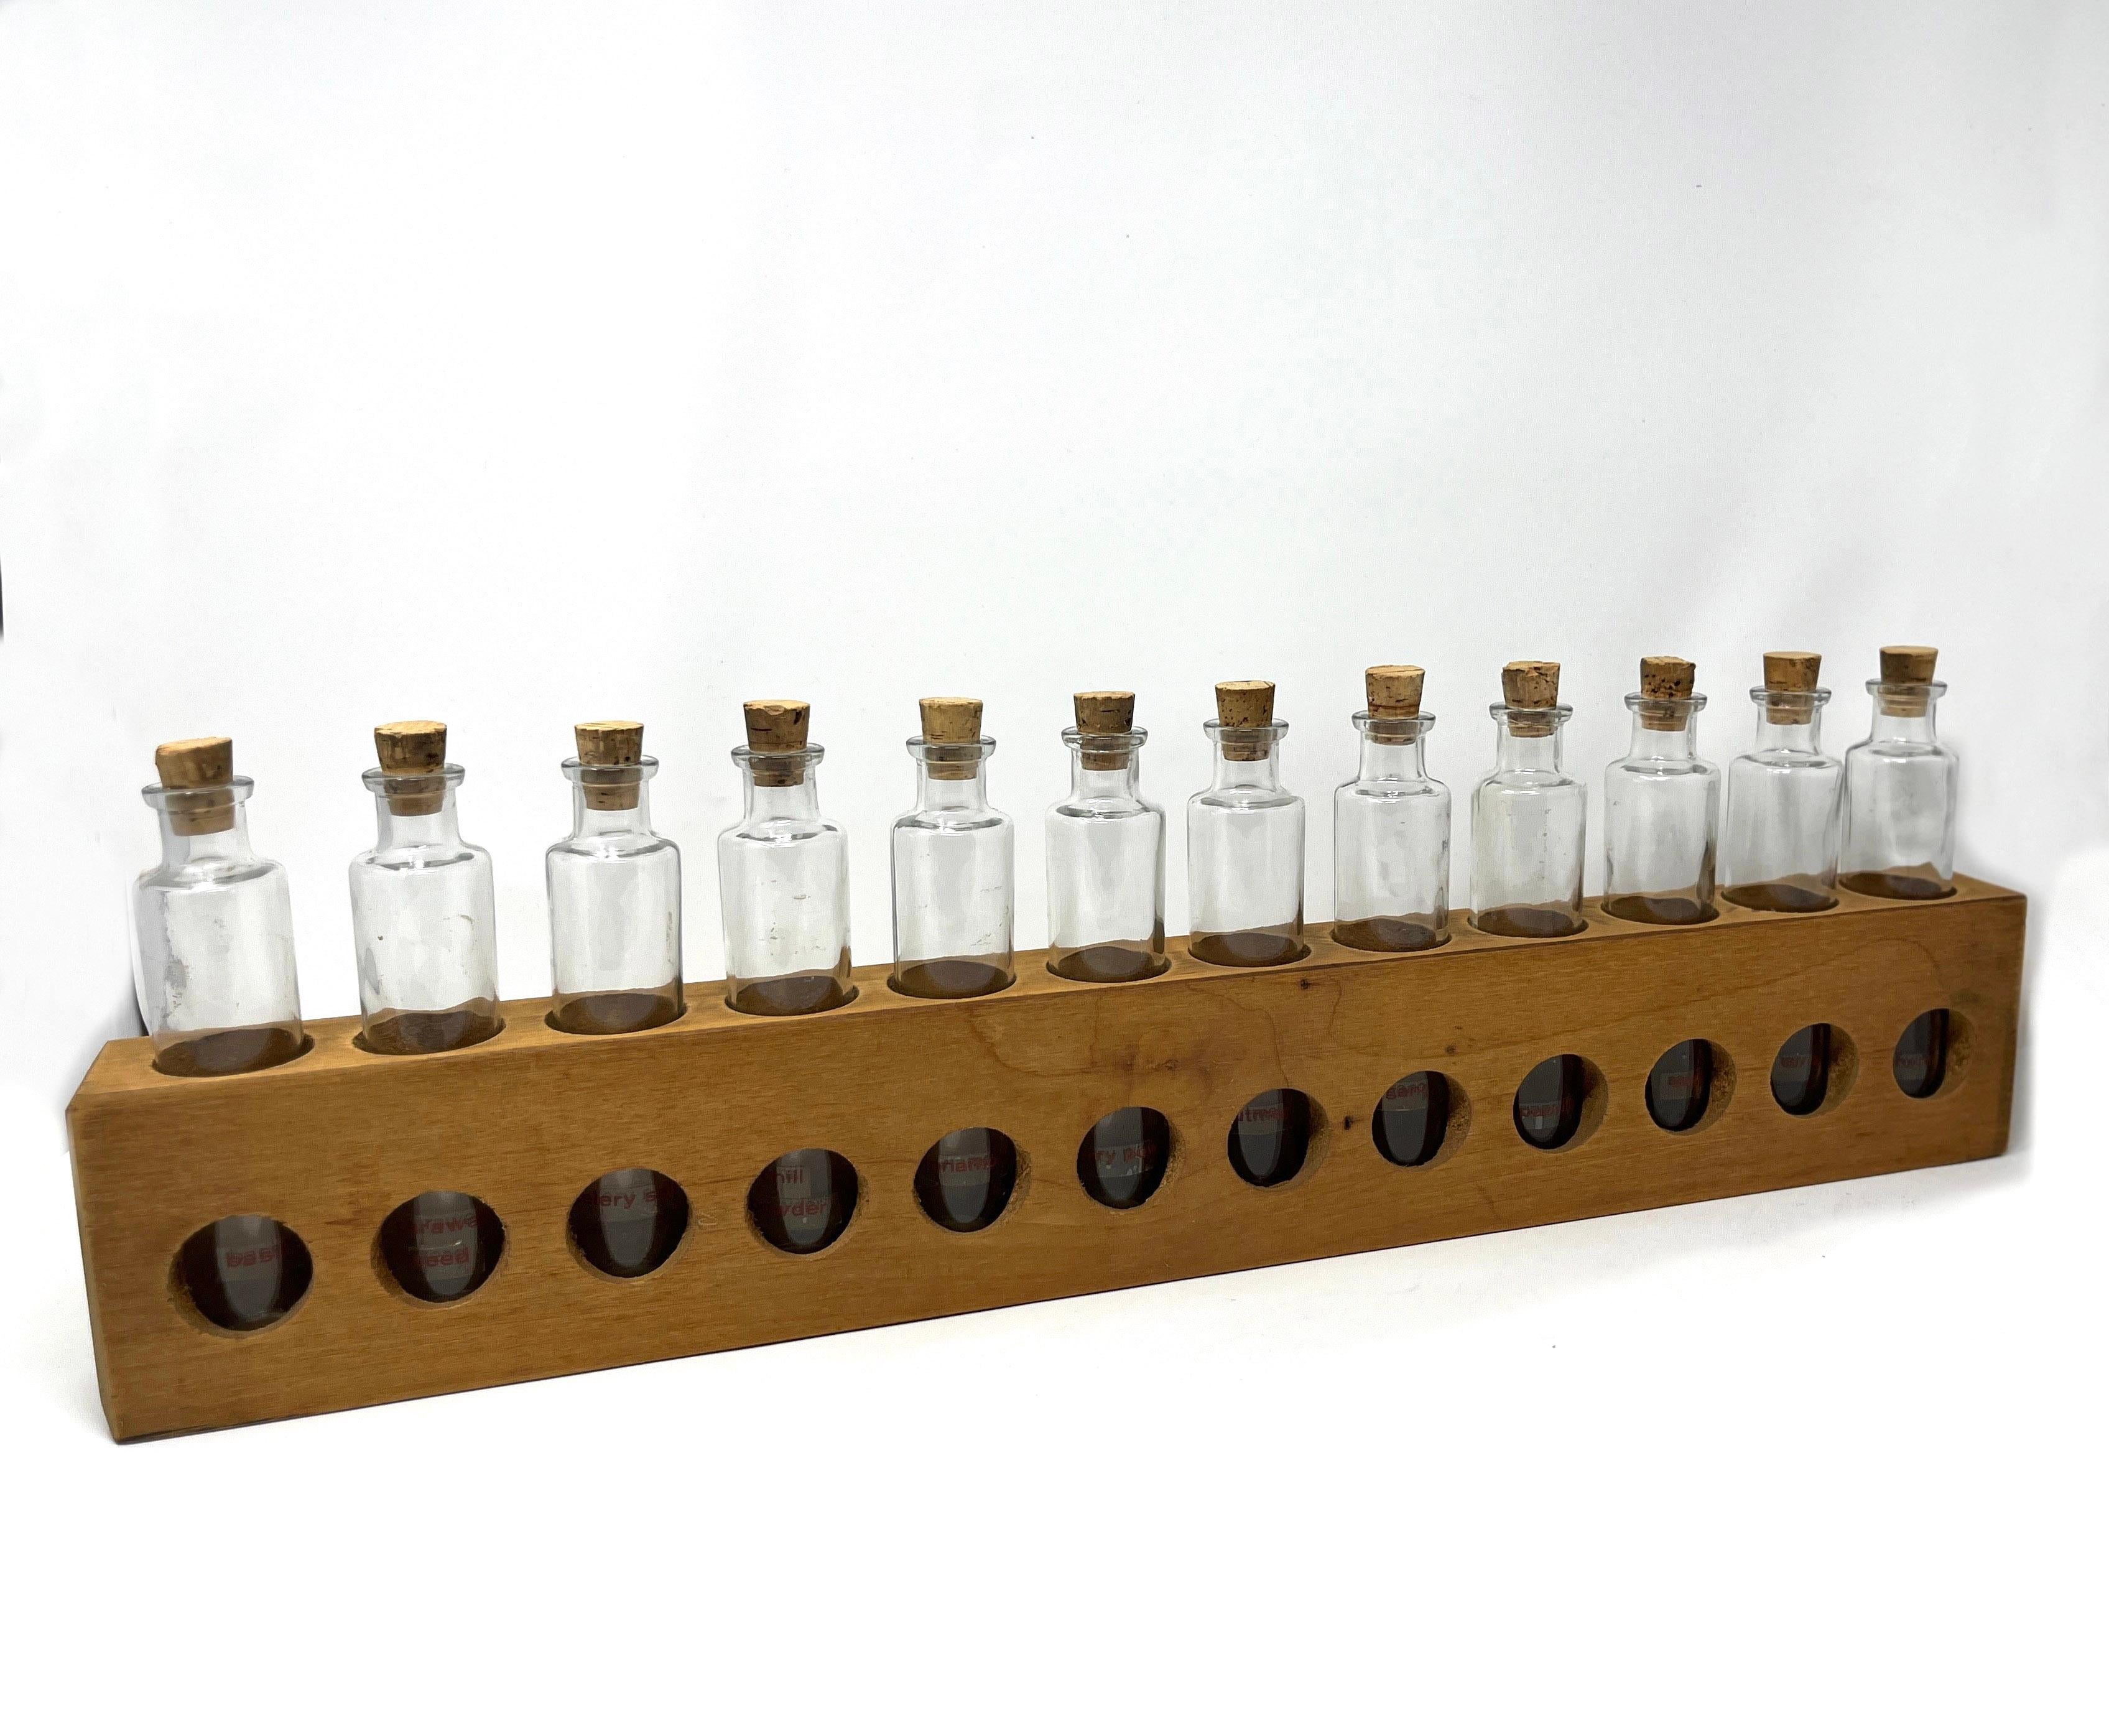 Charming handmade pine spice rack with 12 excellent tall, thin glass jars. Excellent proportions with hardware affixed to hang on the wall. Fabulous for its intended use as as storage for hardware, beads or other craft supplies. 

Each jar has a